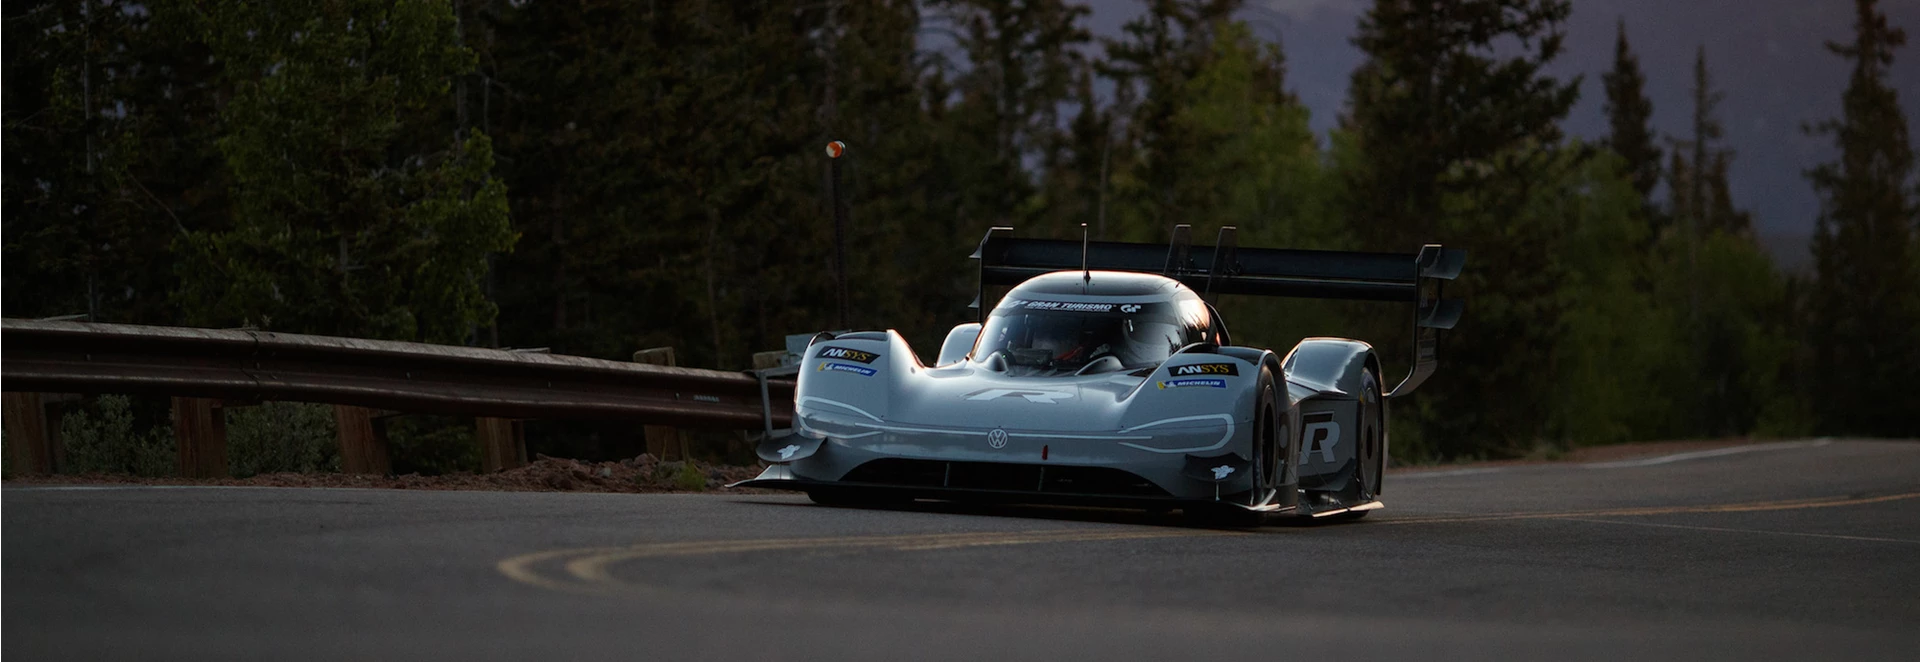 Volkswagen I.D. R sets fastest time in Pikes Peak qualifying